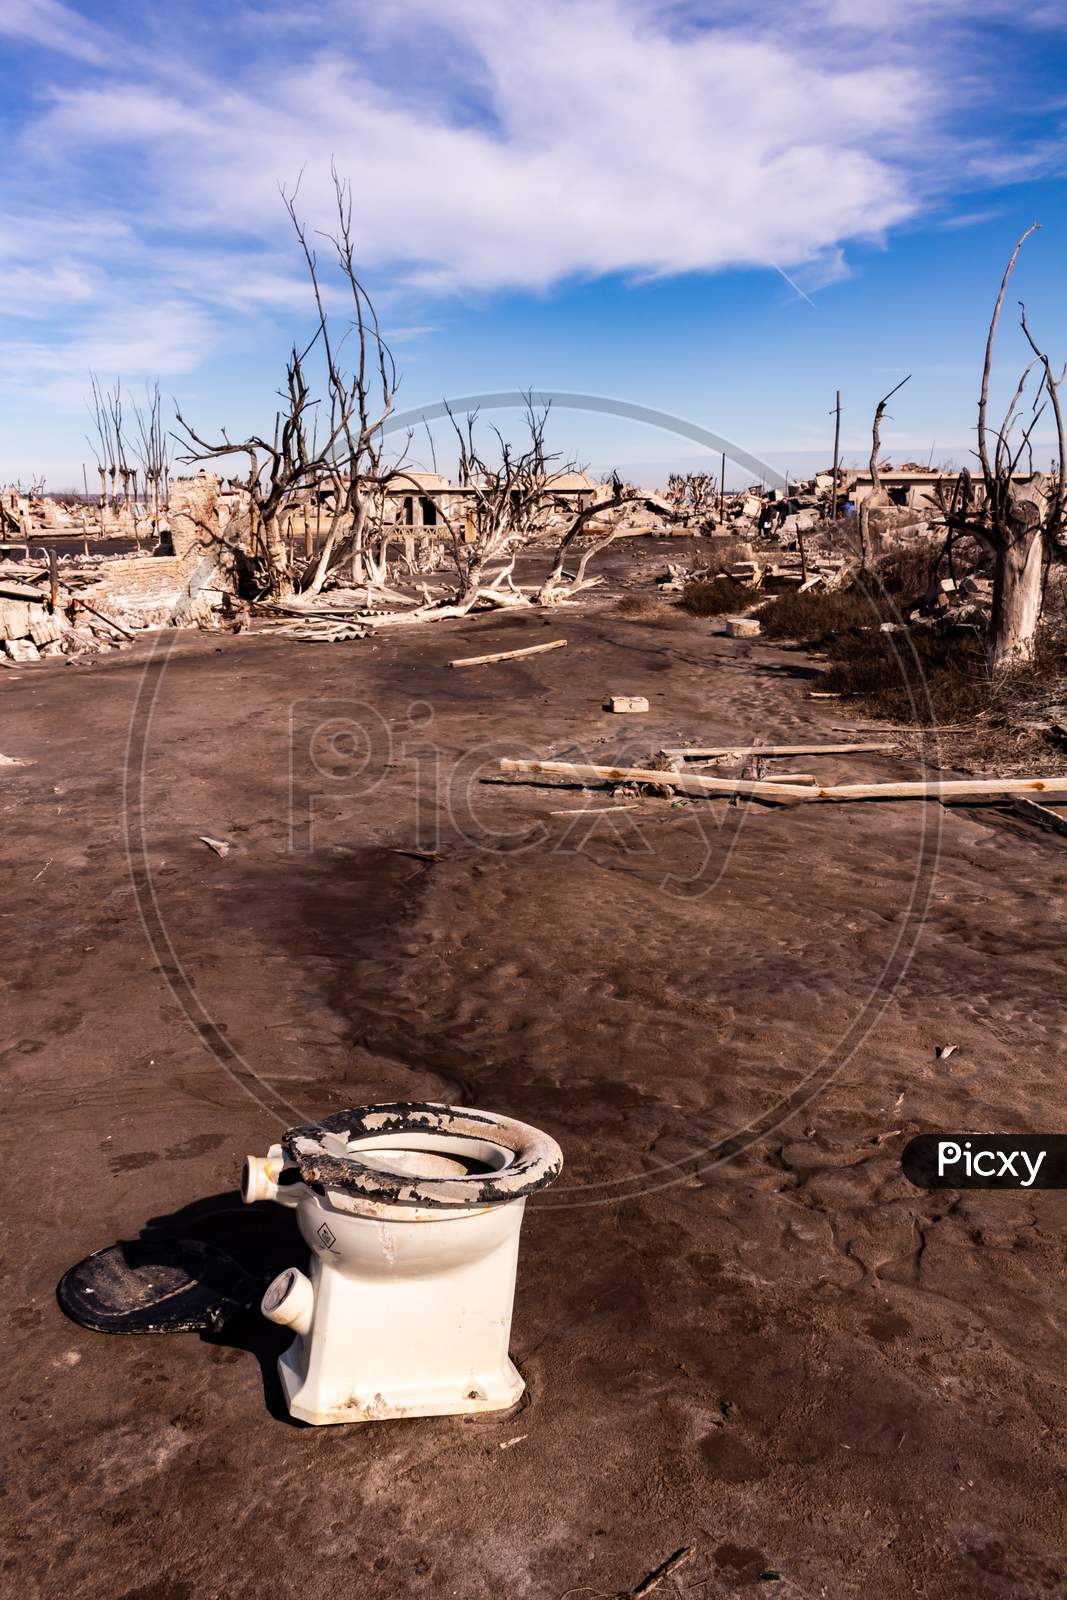 Dead Trees In The City Of Epecuen. Desolate Landscape Without People. Natural Disaster.